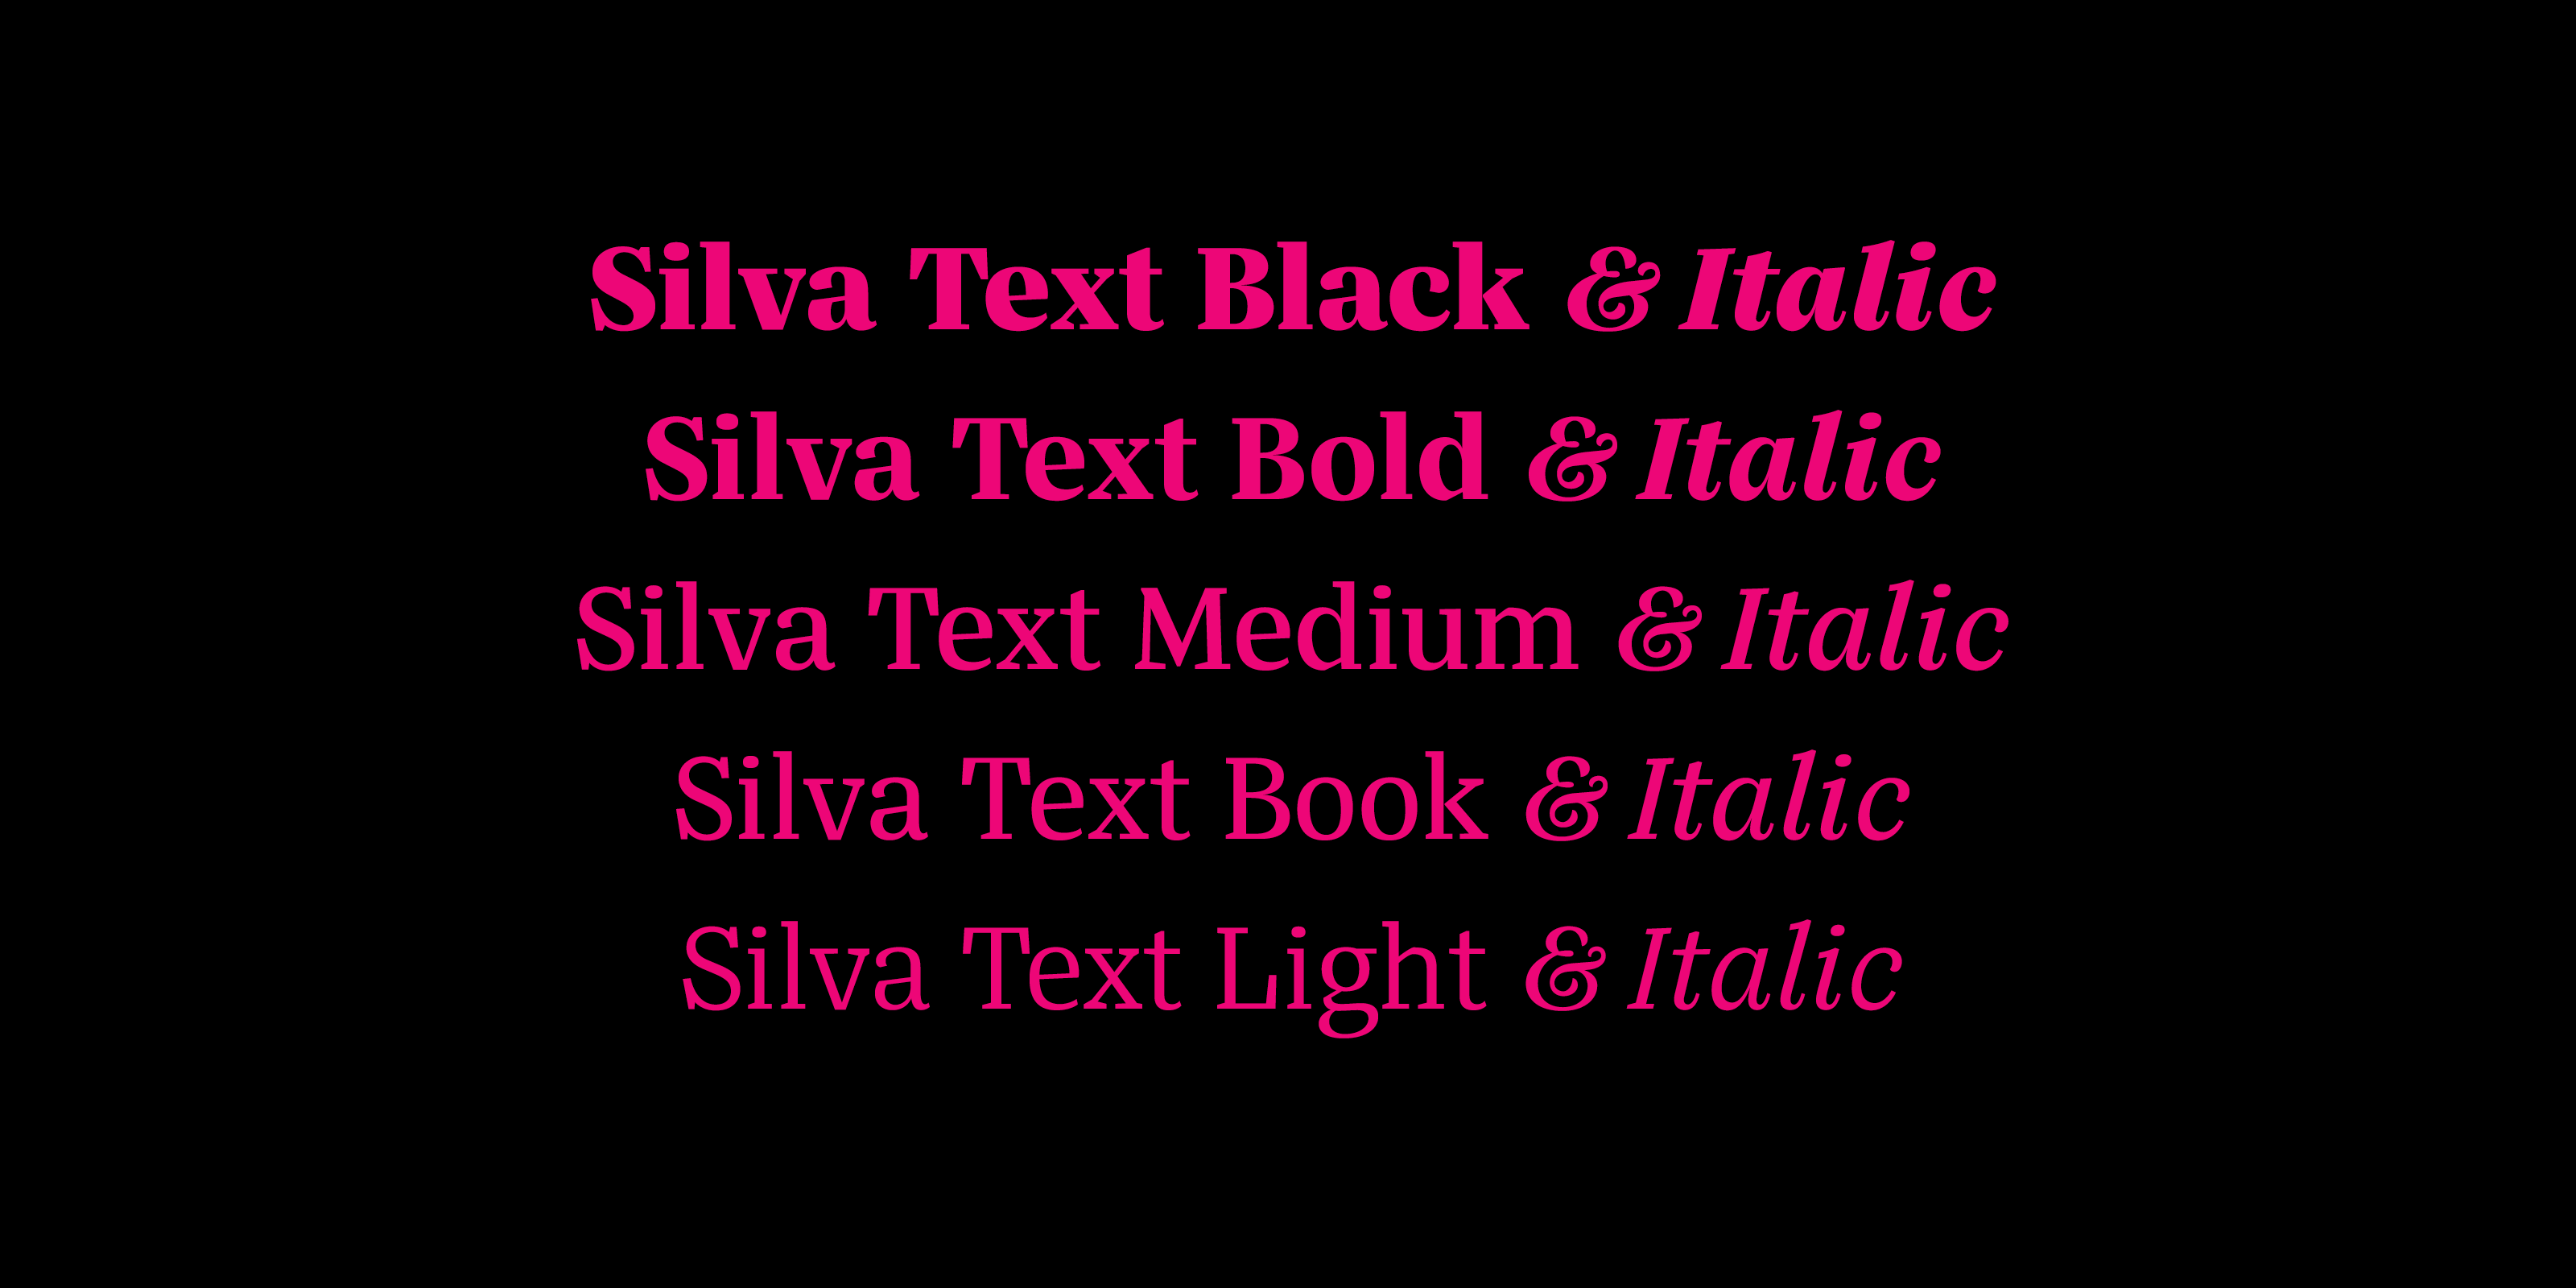 Card displaying Silva Text typeface in various styles